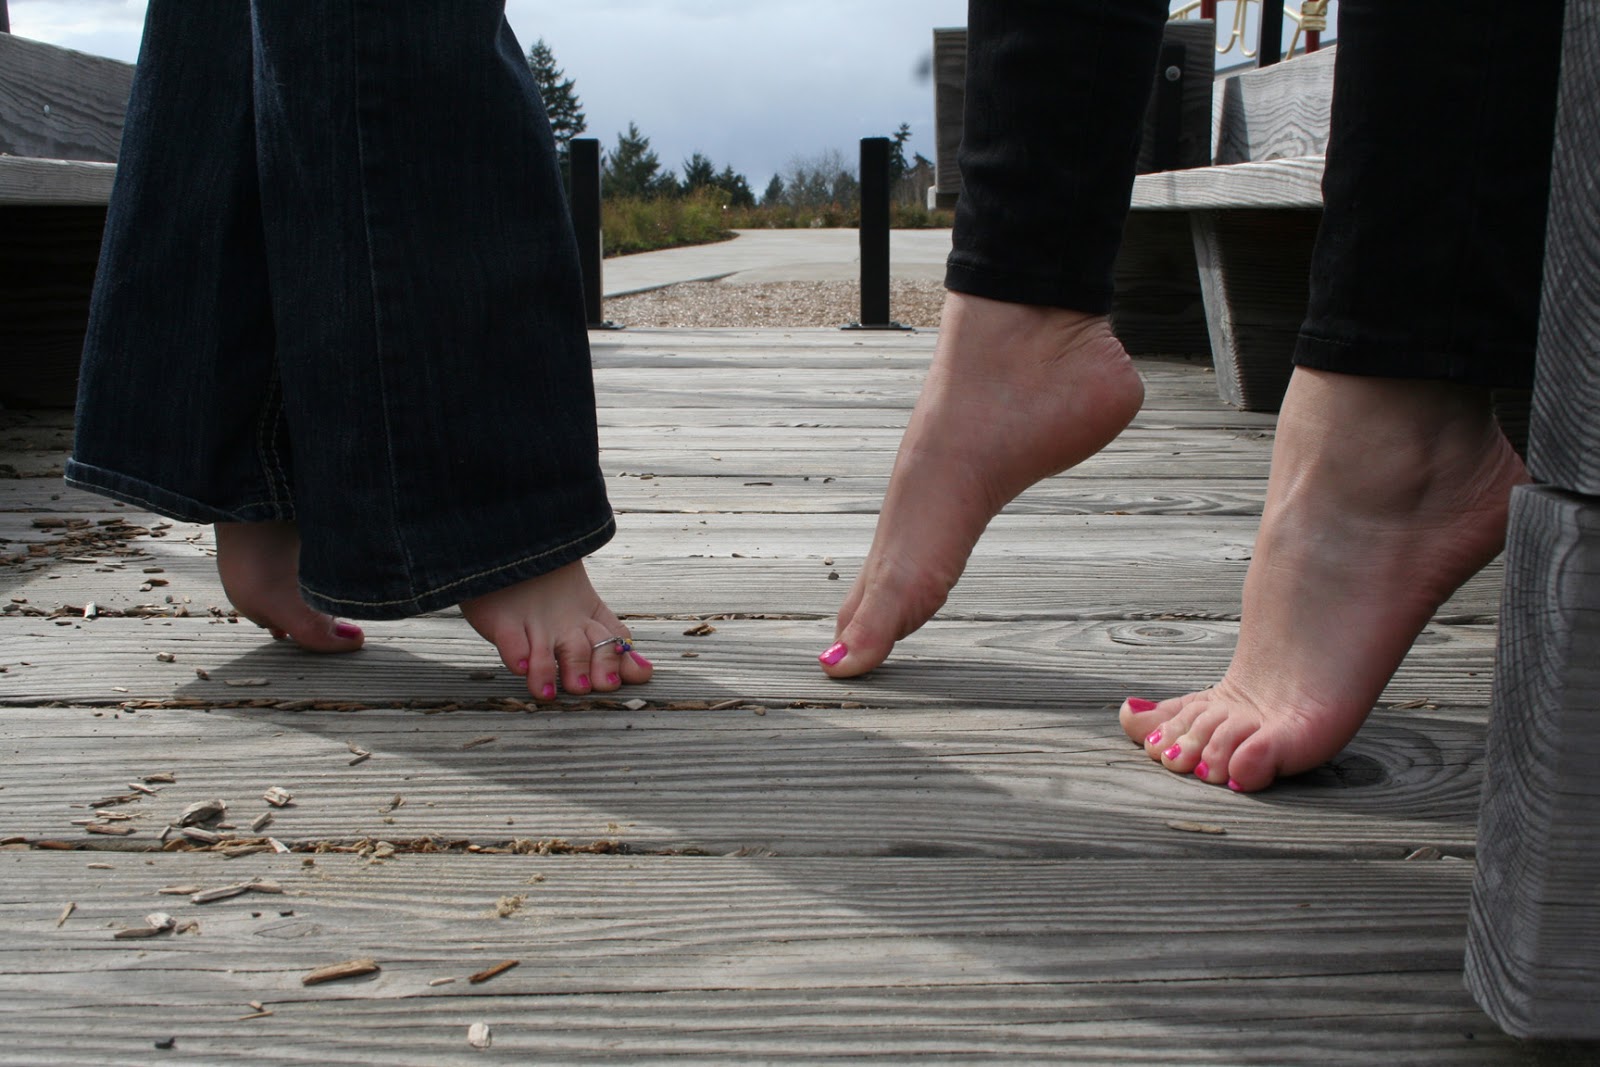 2 Girls Show Off Their Bare Feet Together.